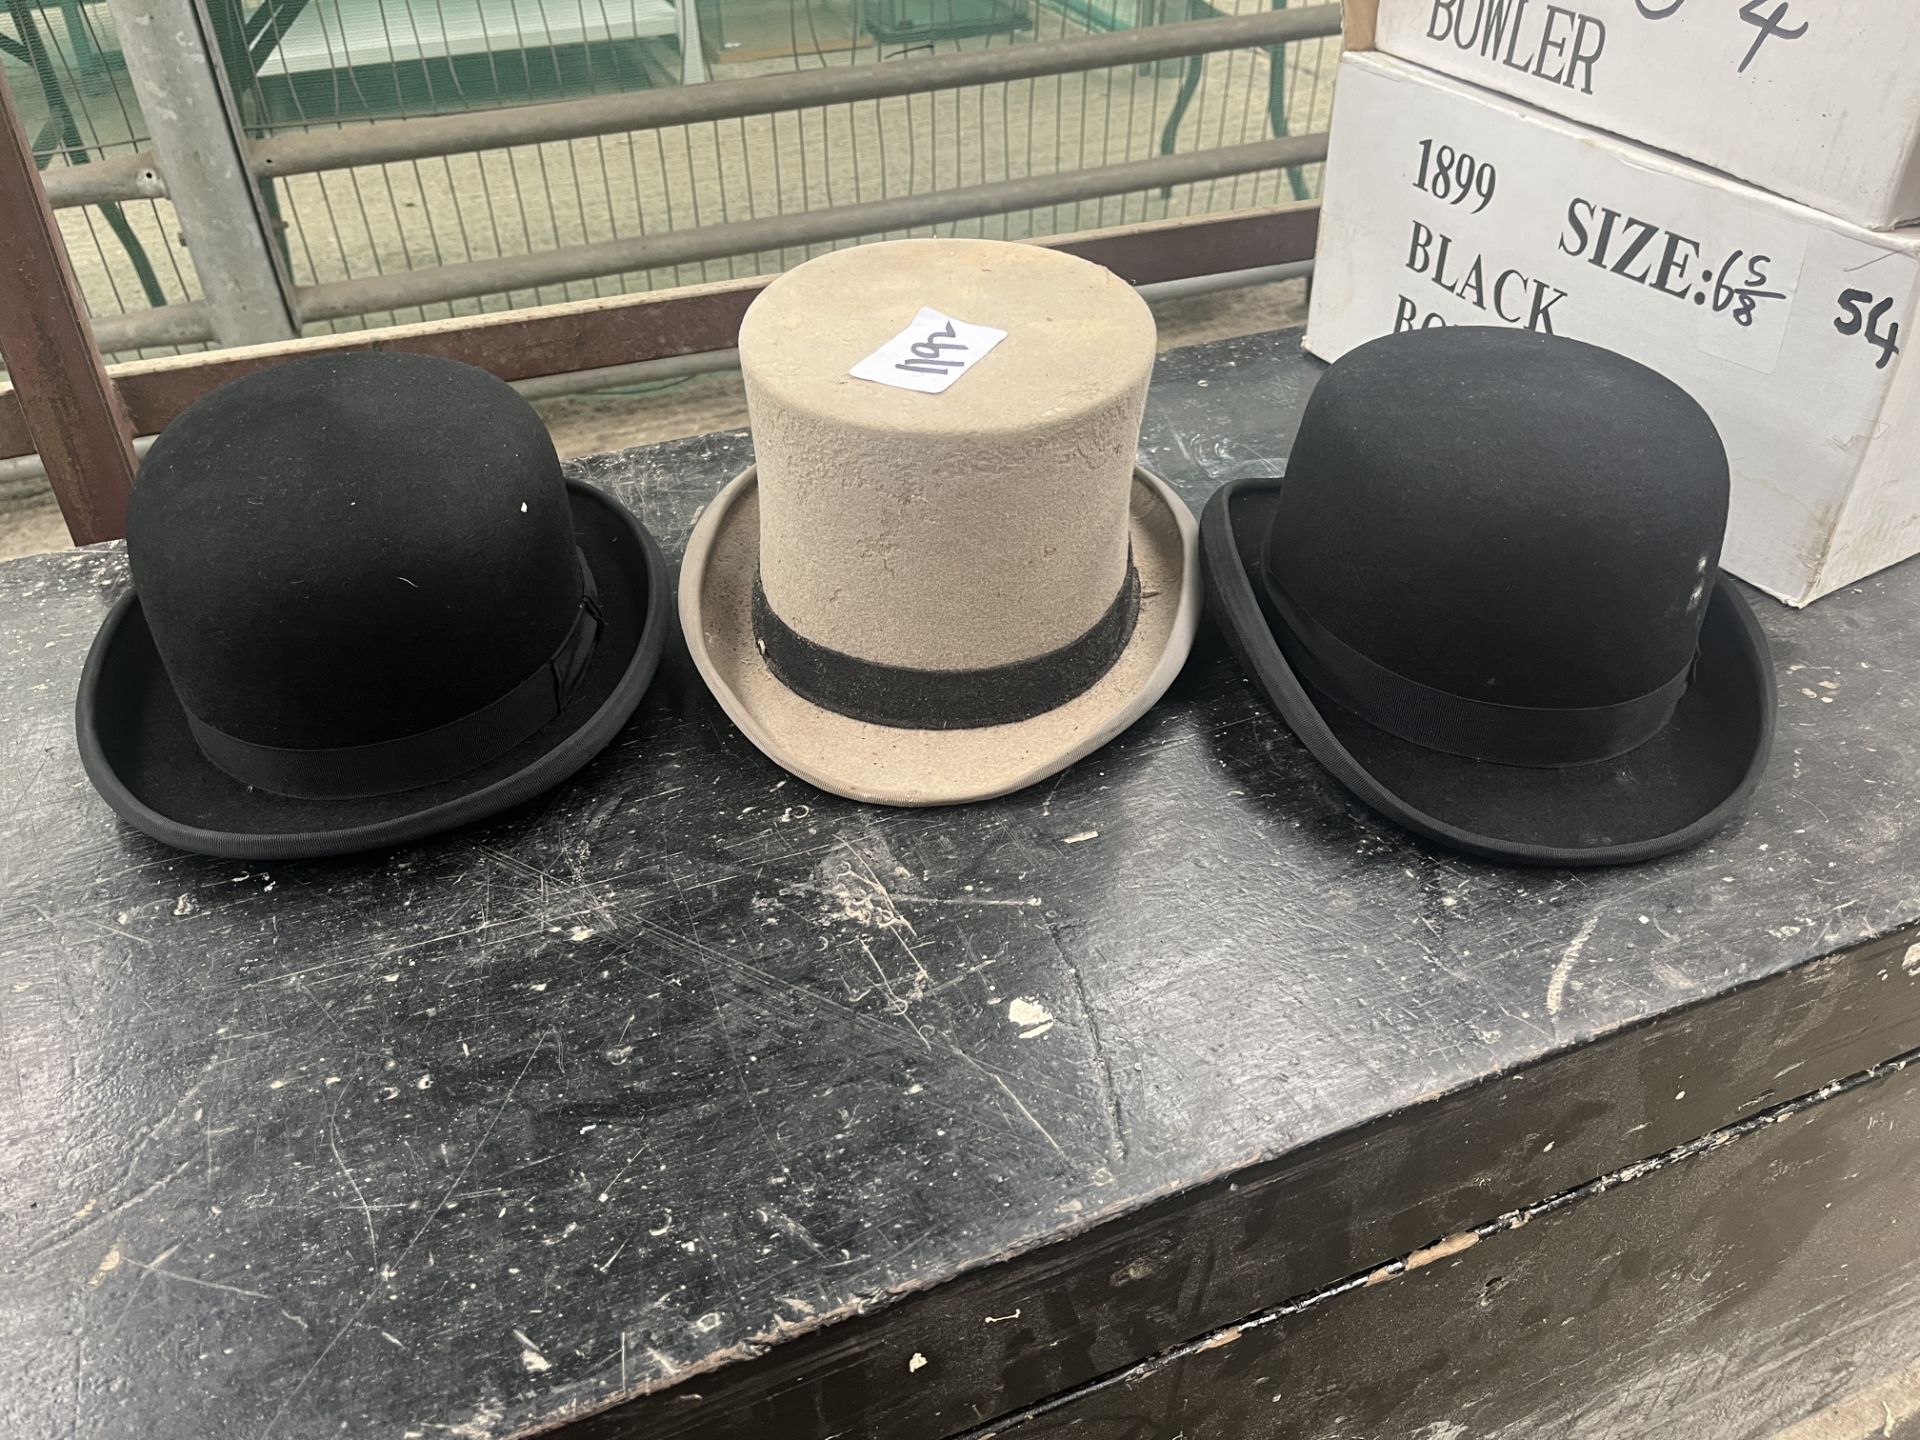 Two bowler hats and a grey top hat